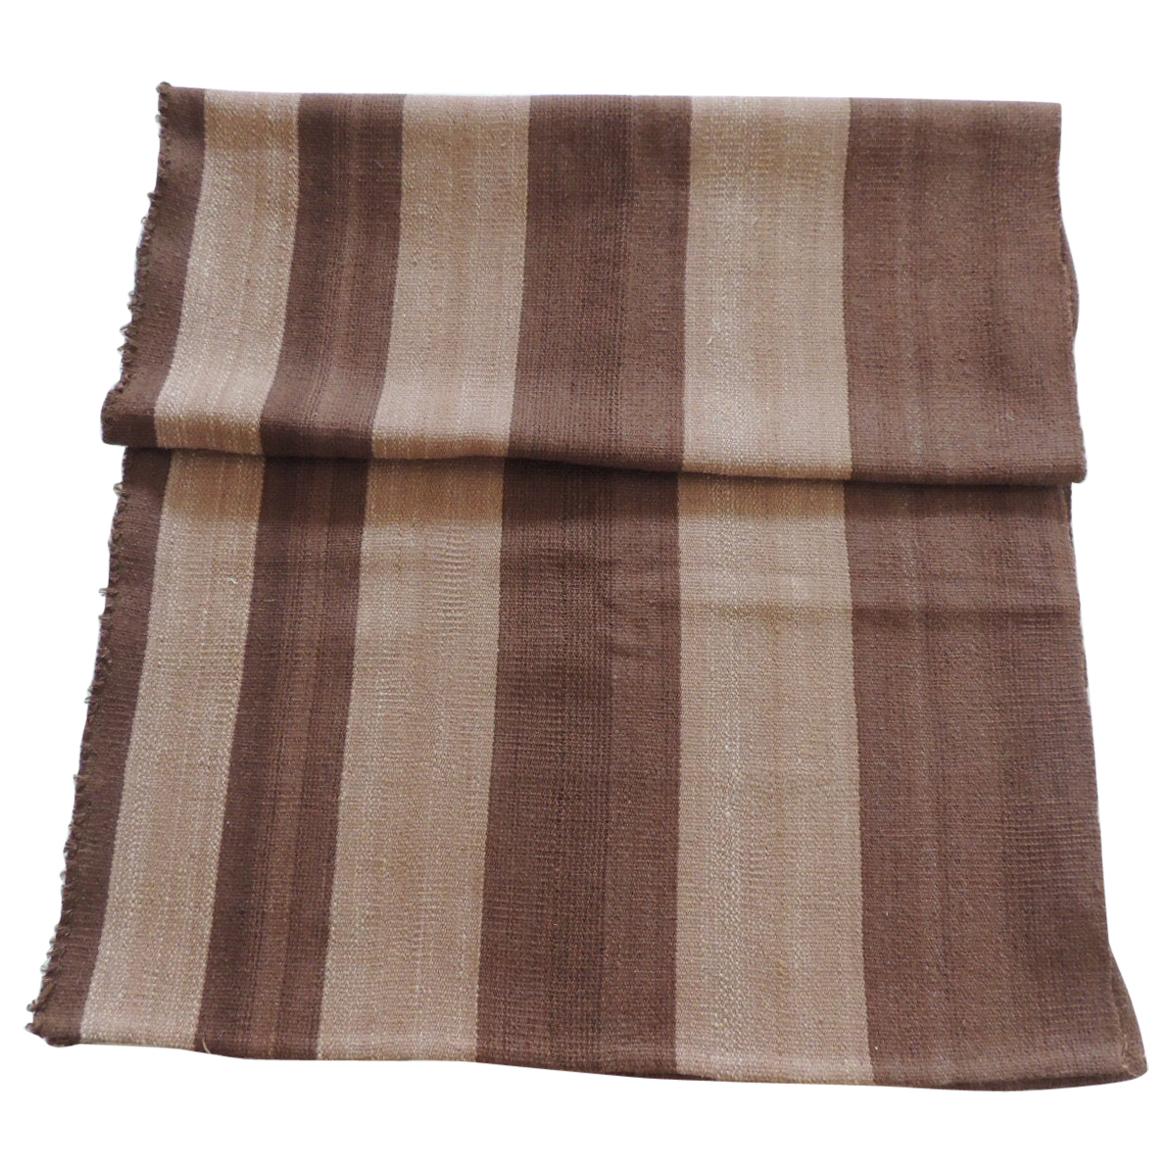 Vintage Brown and Camel Woven Textile For Sale